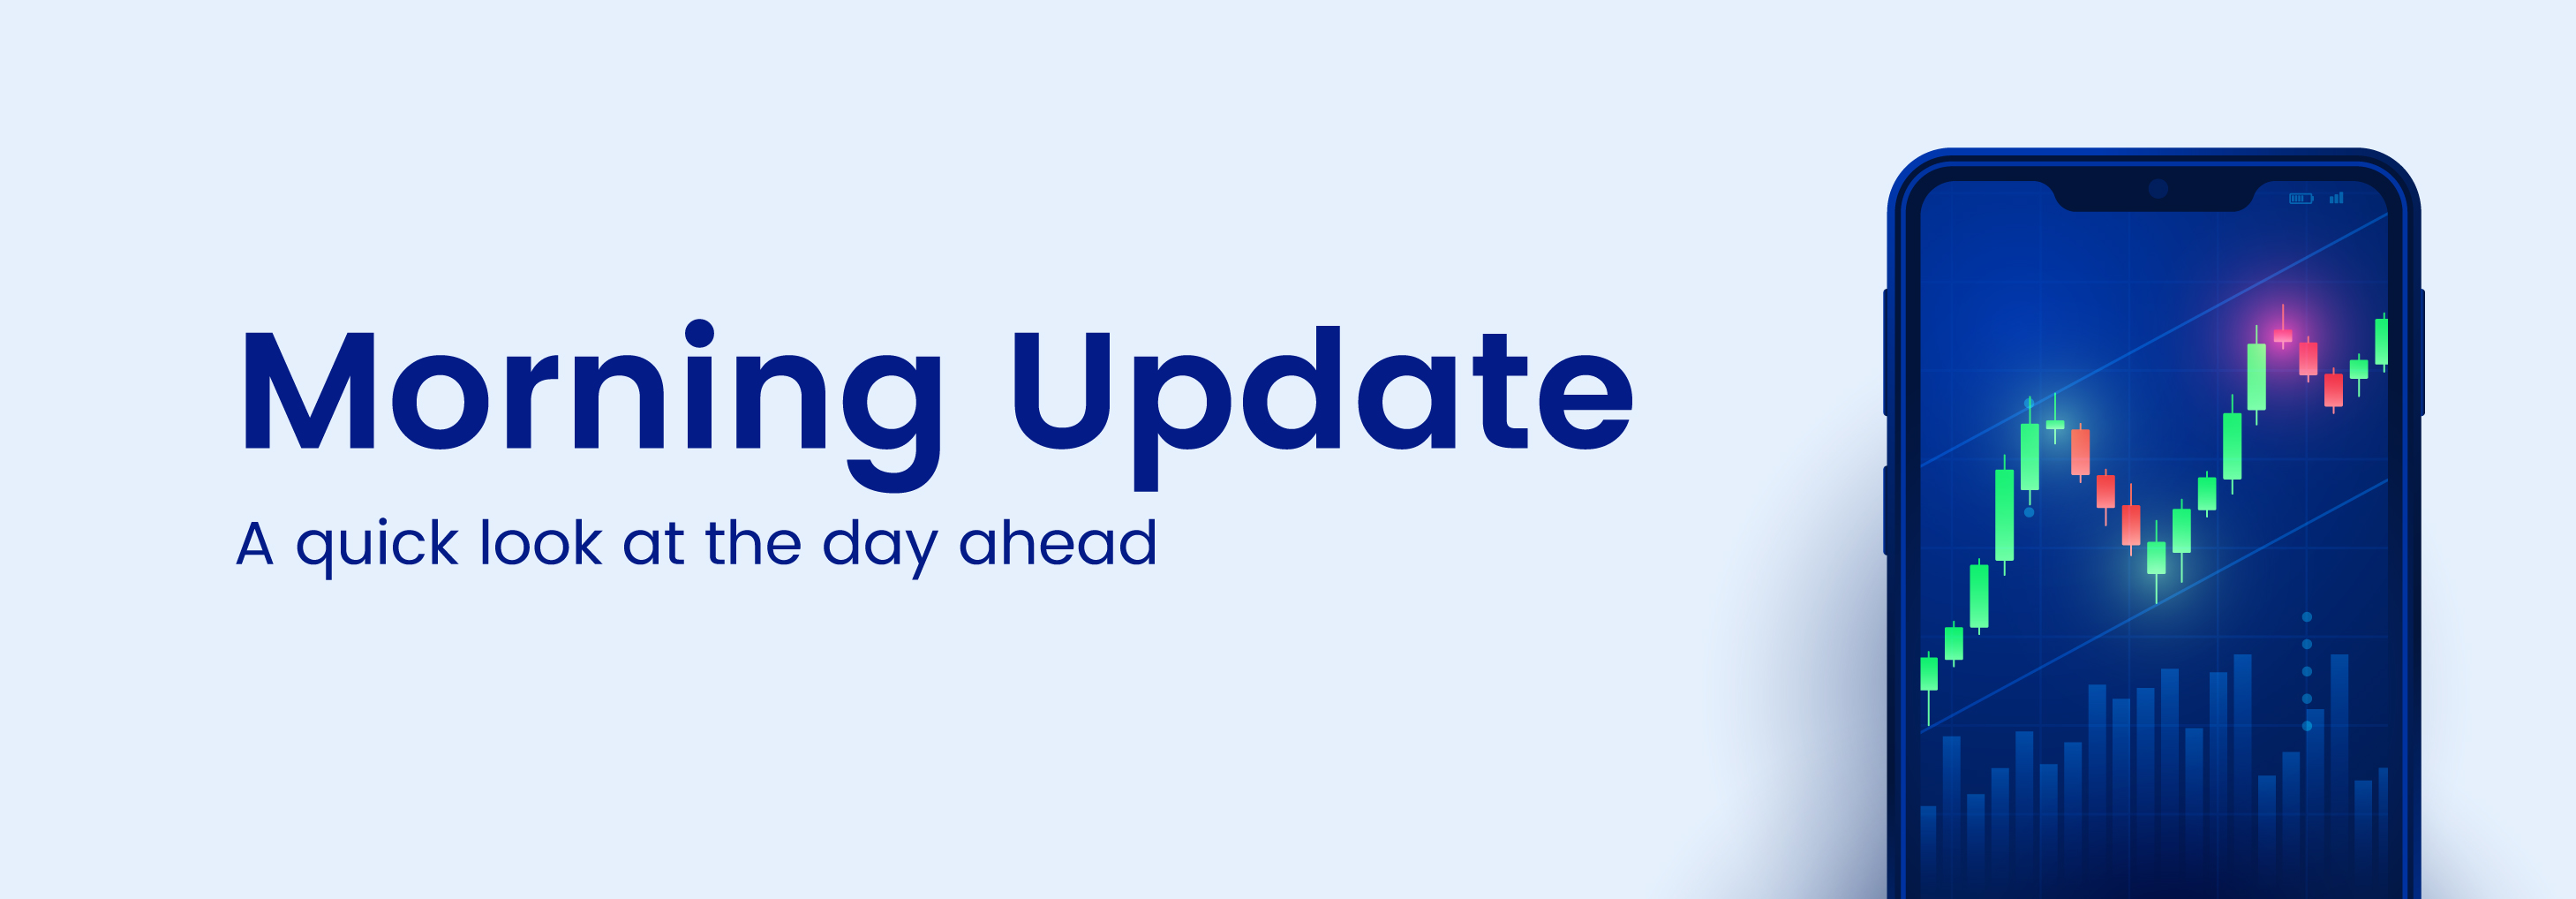 Morning Update for 24 March 2021 - Upstox